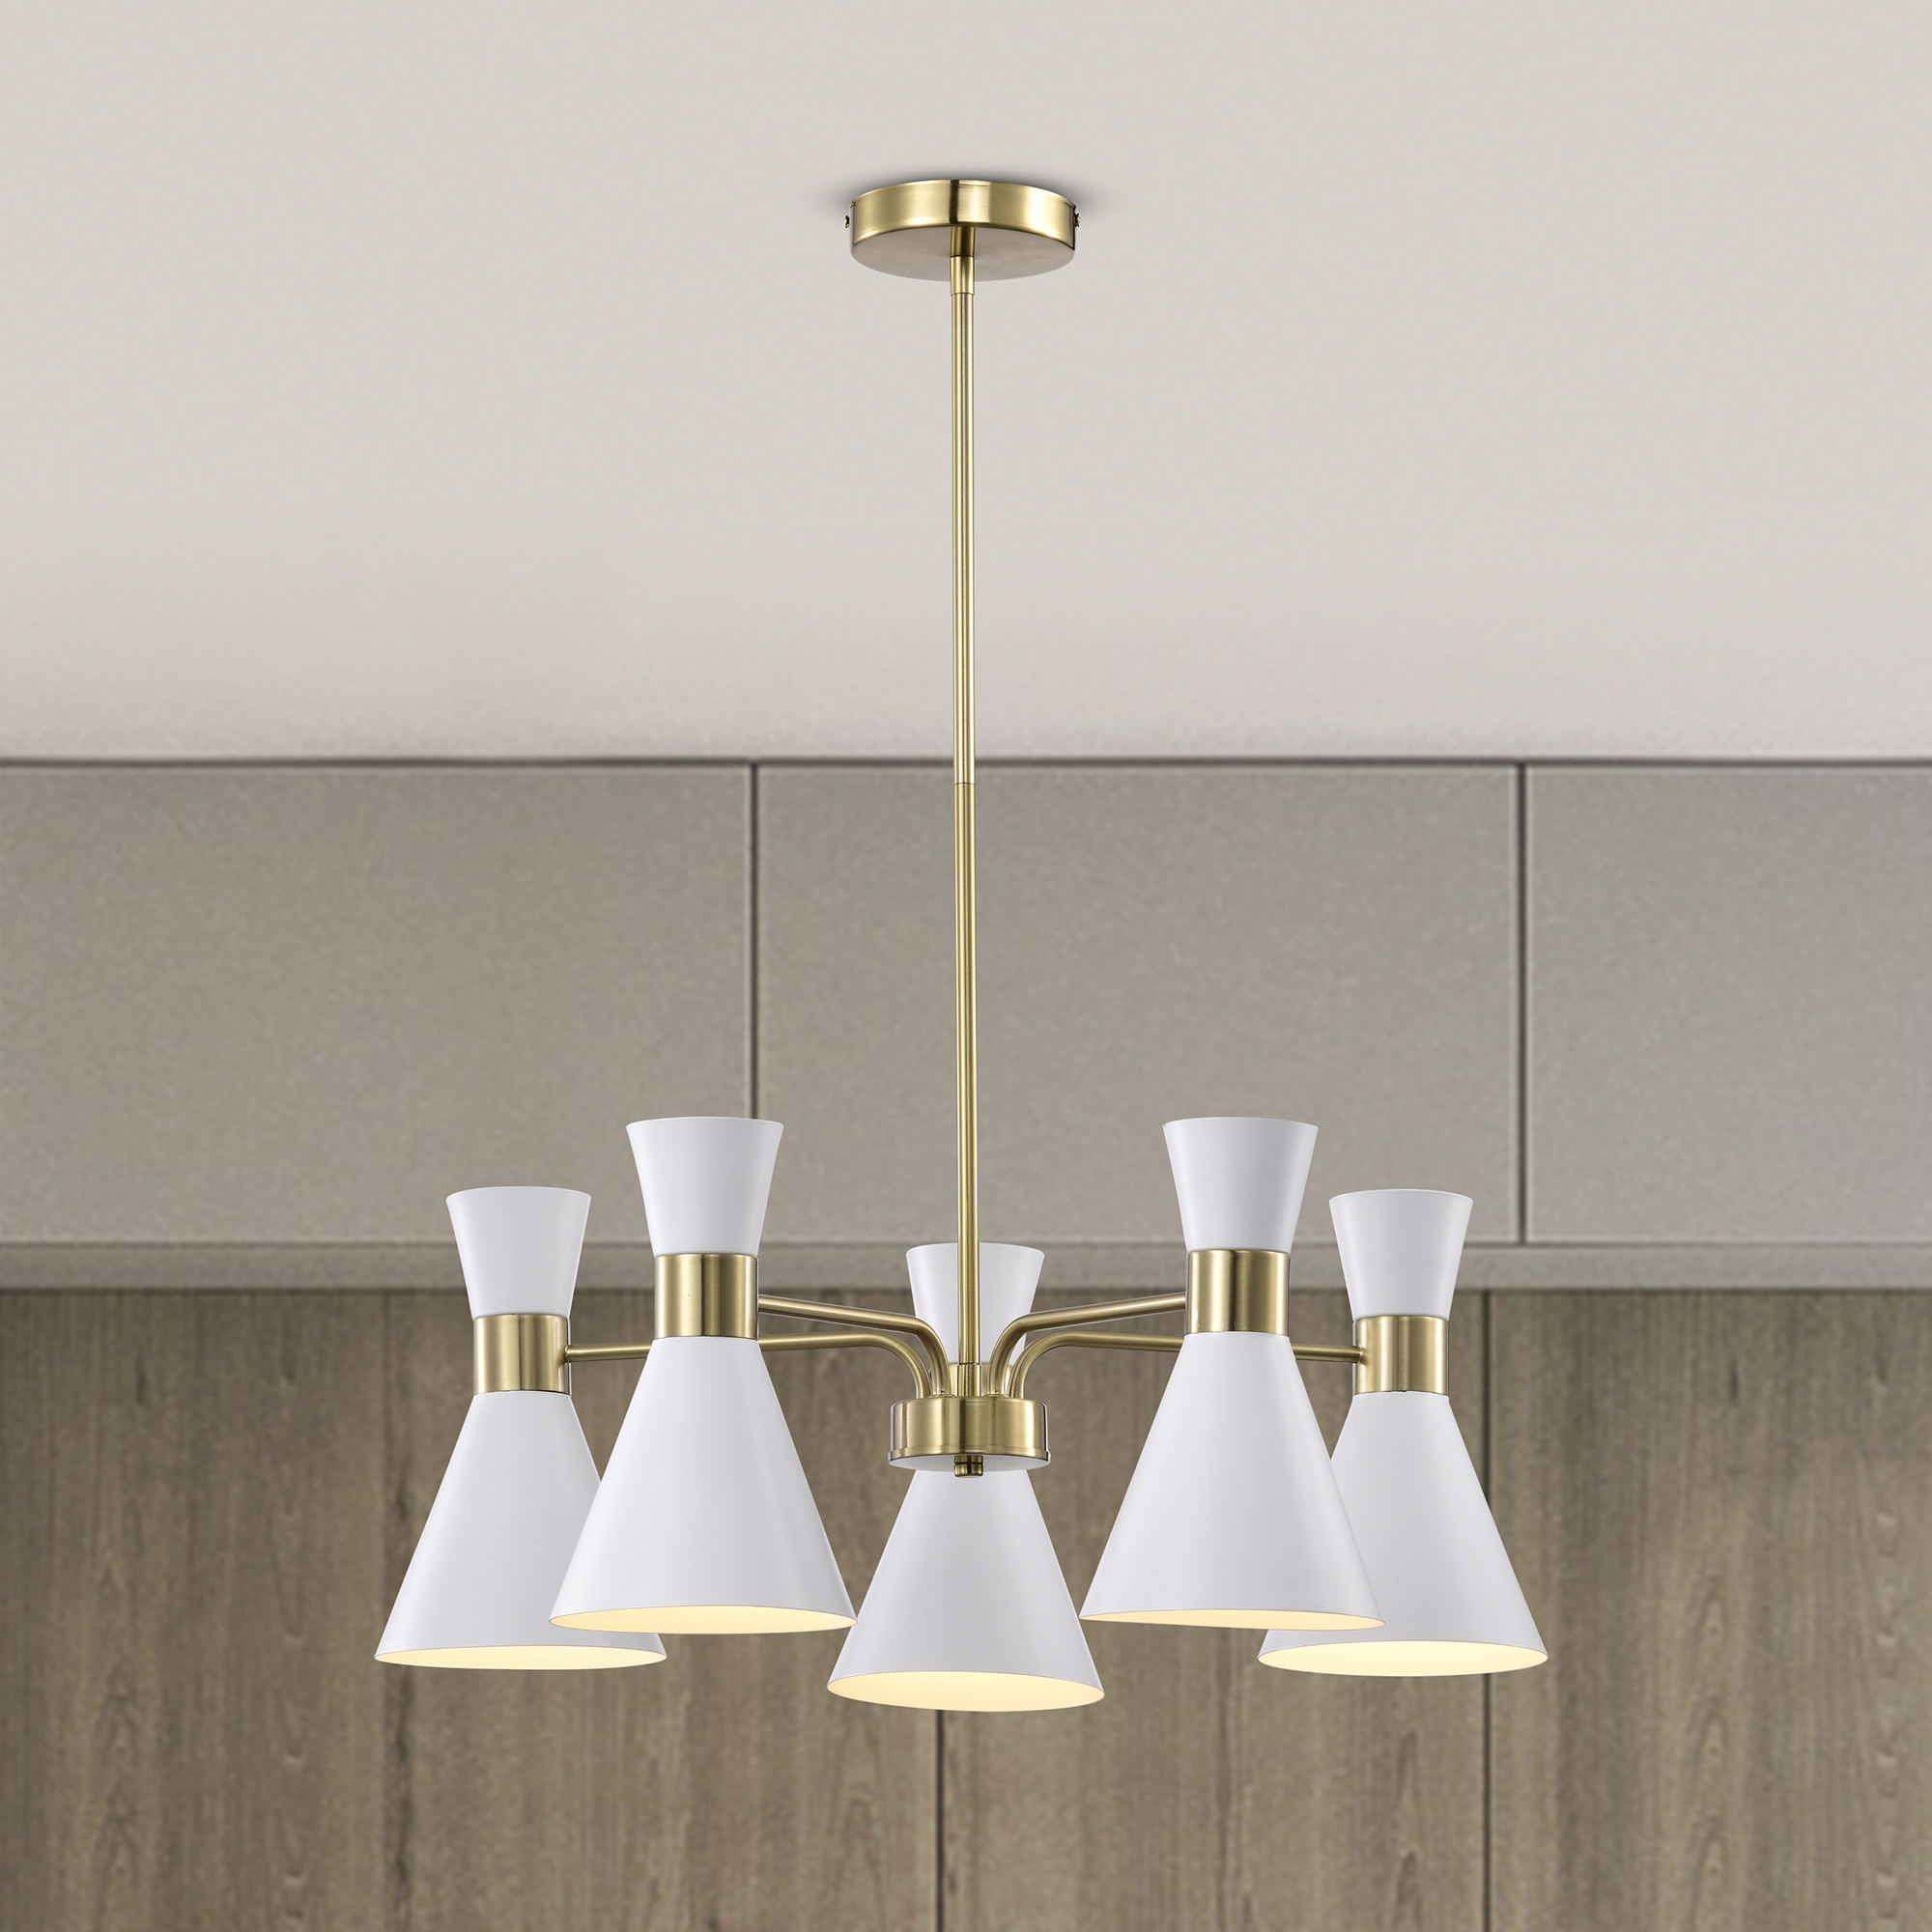 Mariet 24.9 in. 5-Light Indoor Brass and Matte White Finish Chandelier with Light Kit